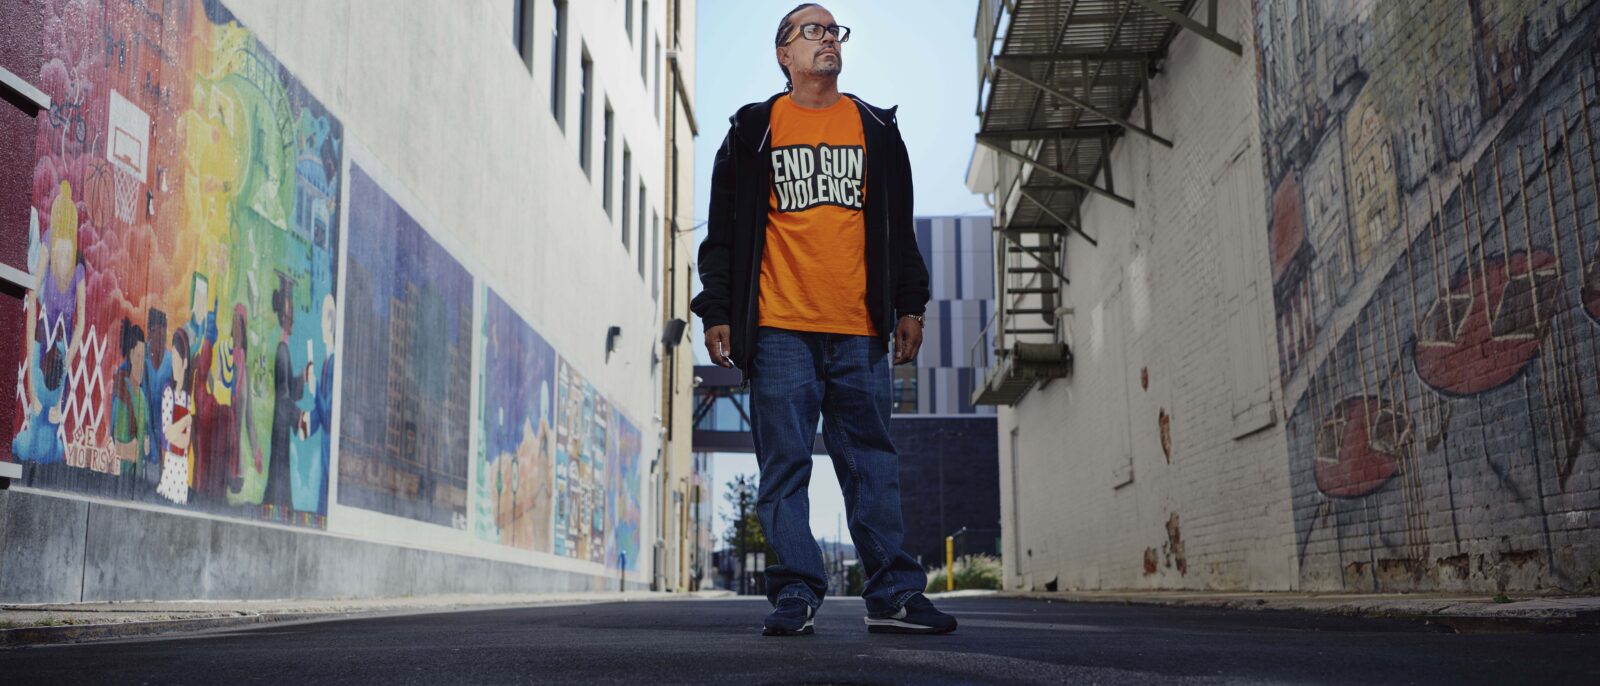 Jose Rivera stands in the middle of an alley wearing an orange t-shirt that reads "End Gun Violence Now".